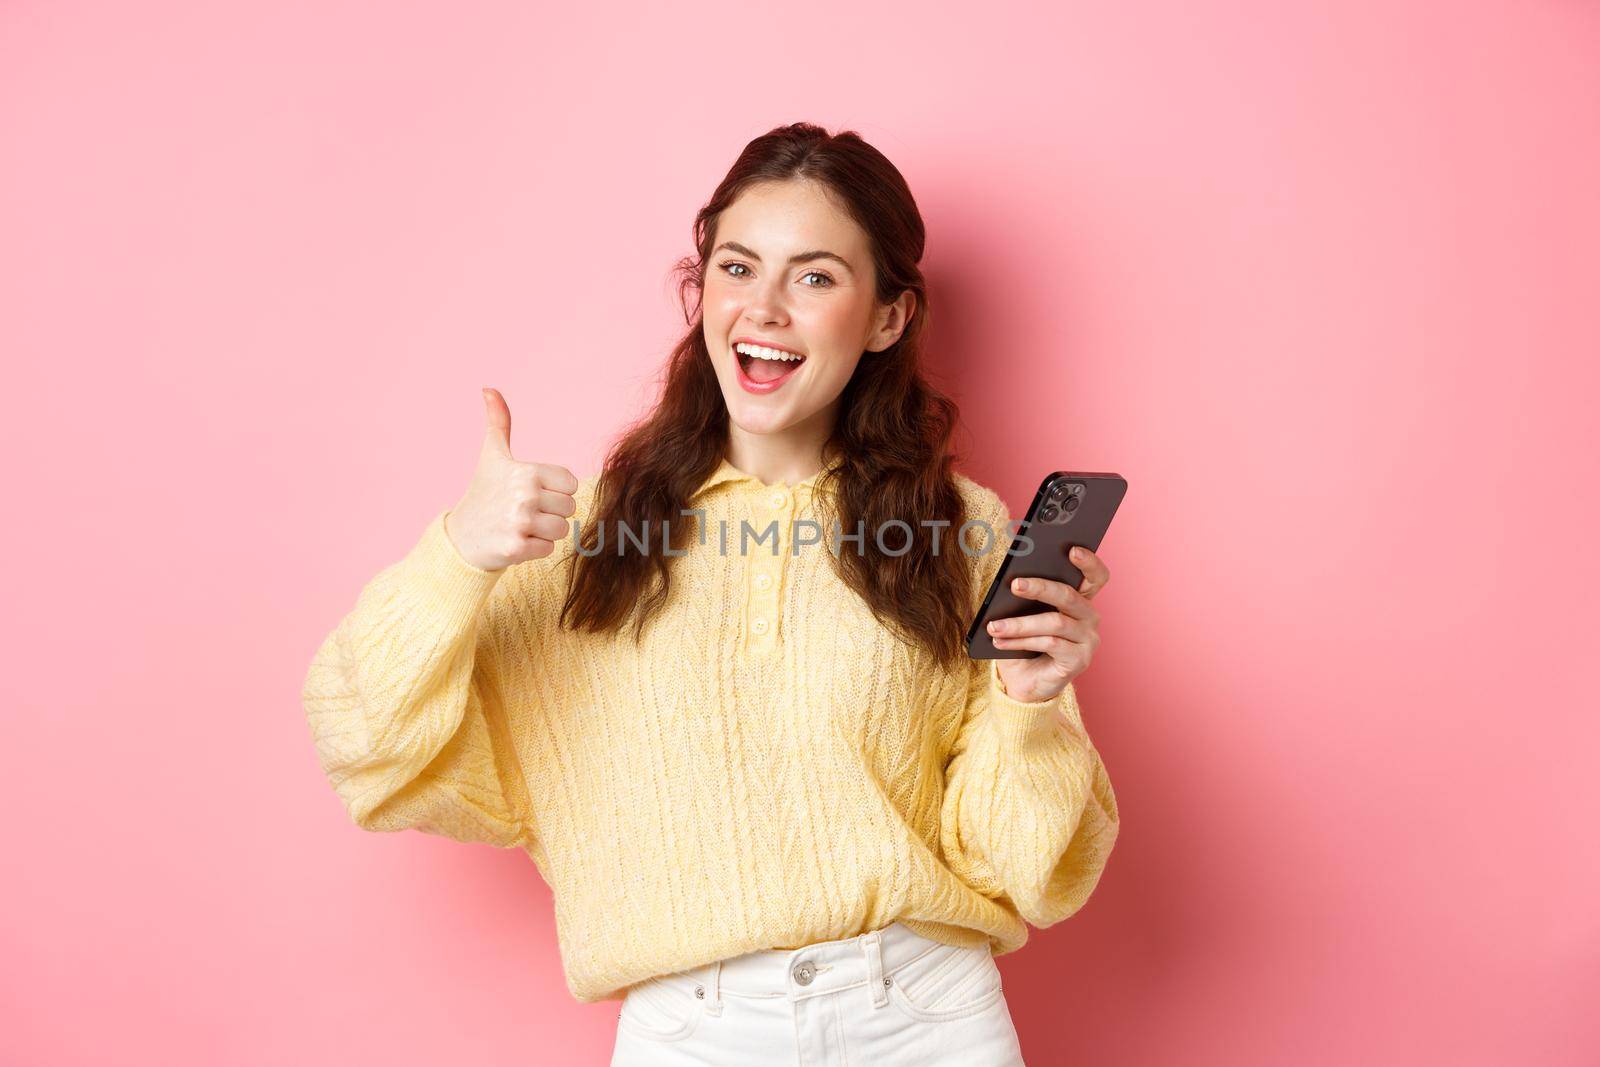 Portrait of attractive glamour girl showing thumbs up after using app on smartphone, online shopping application, standing against pink background, smiling satisfied.